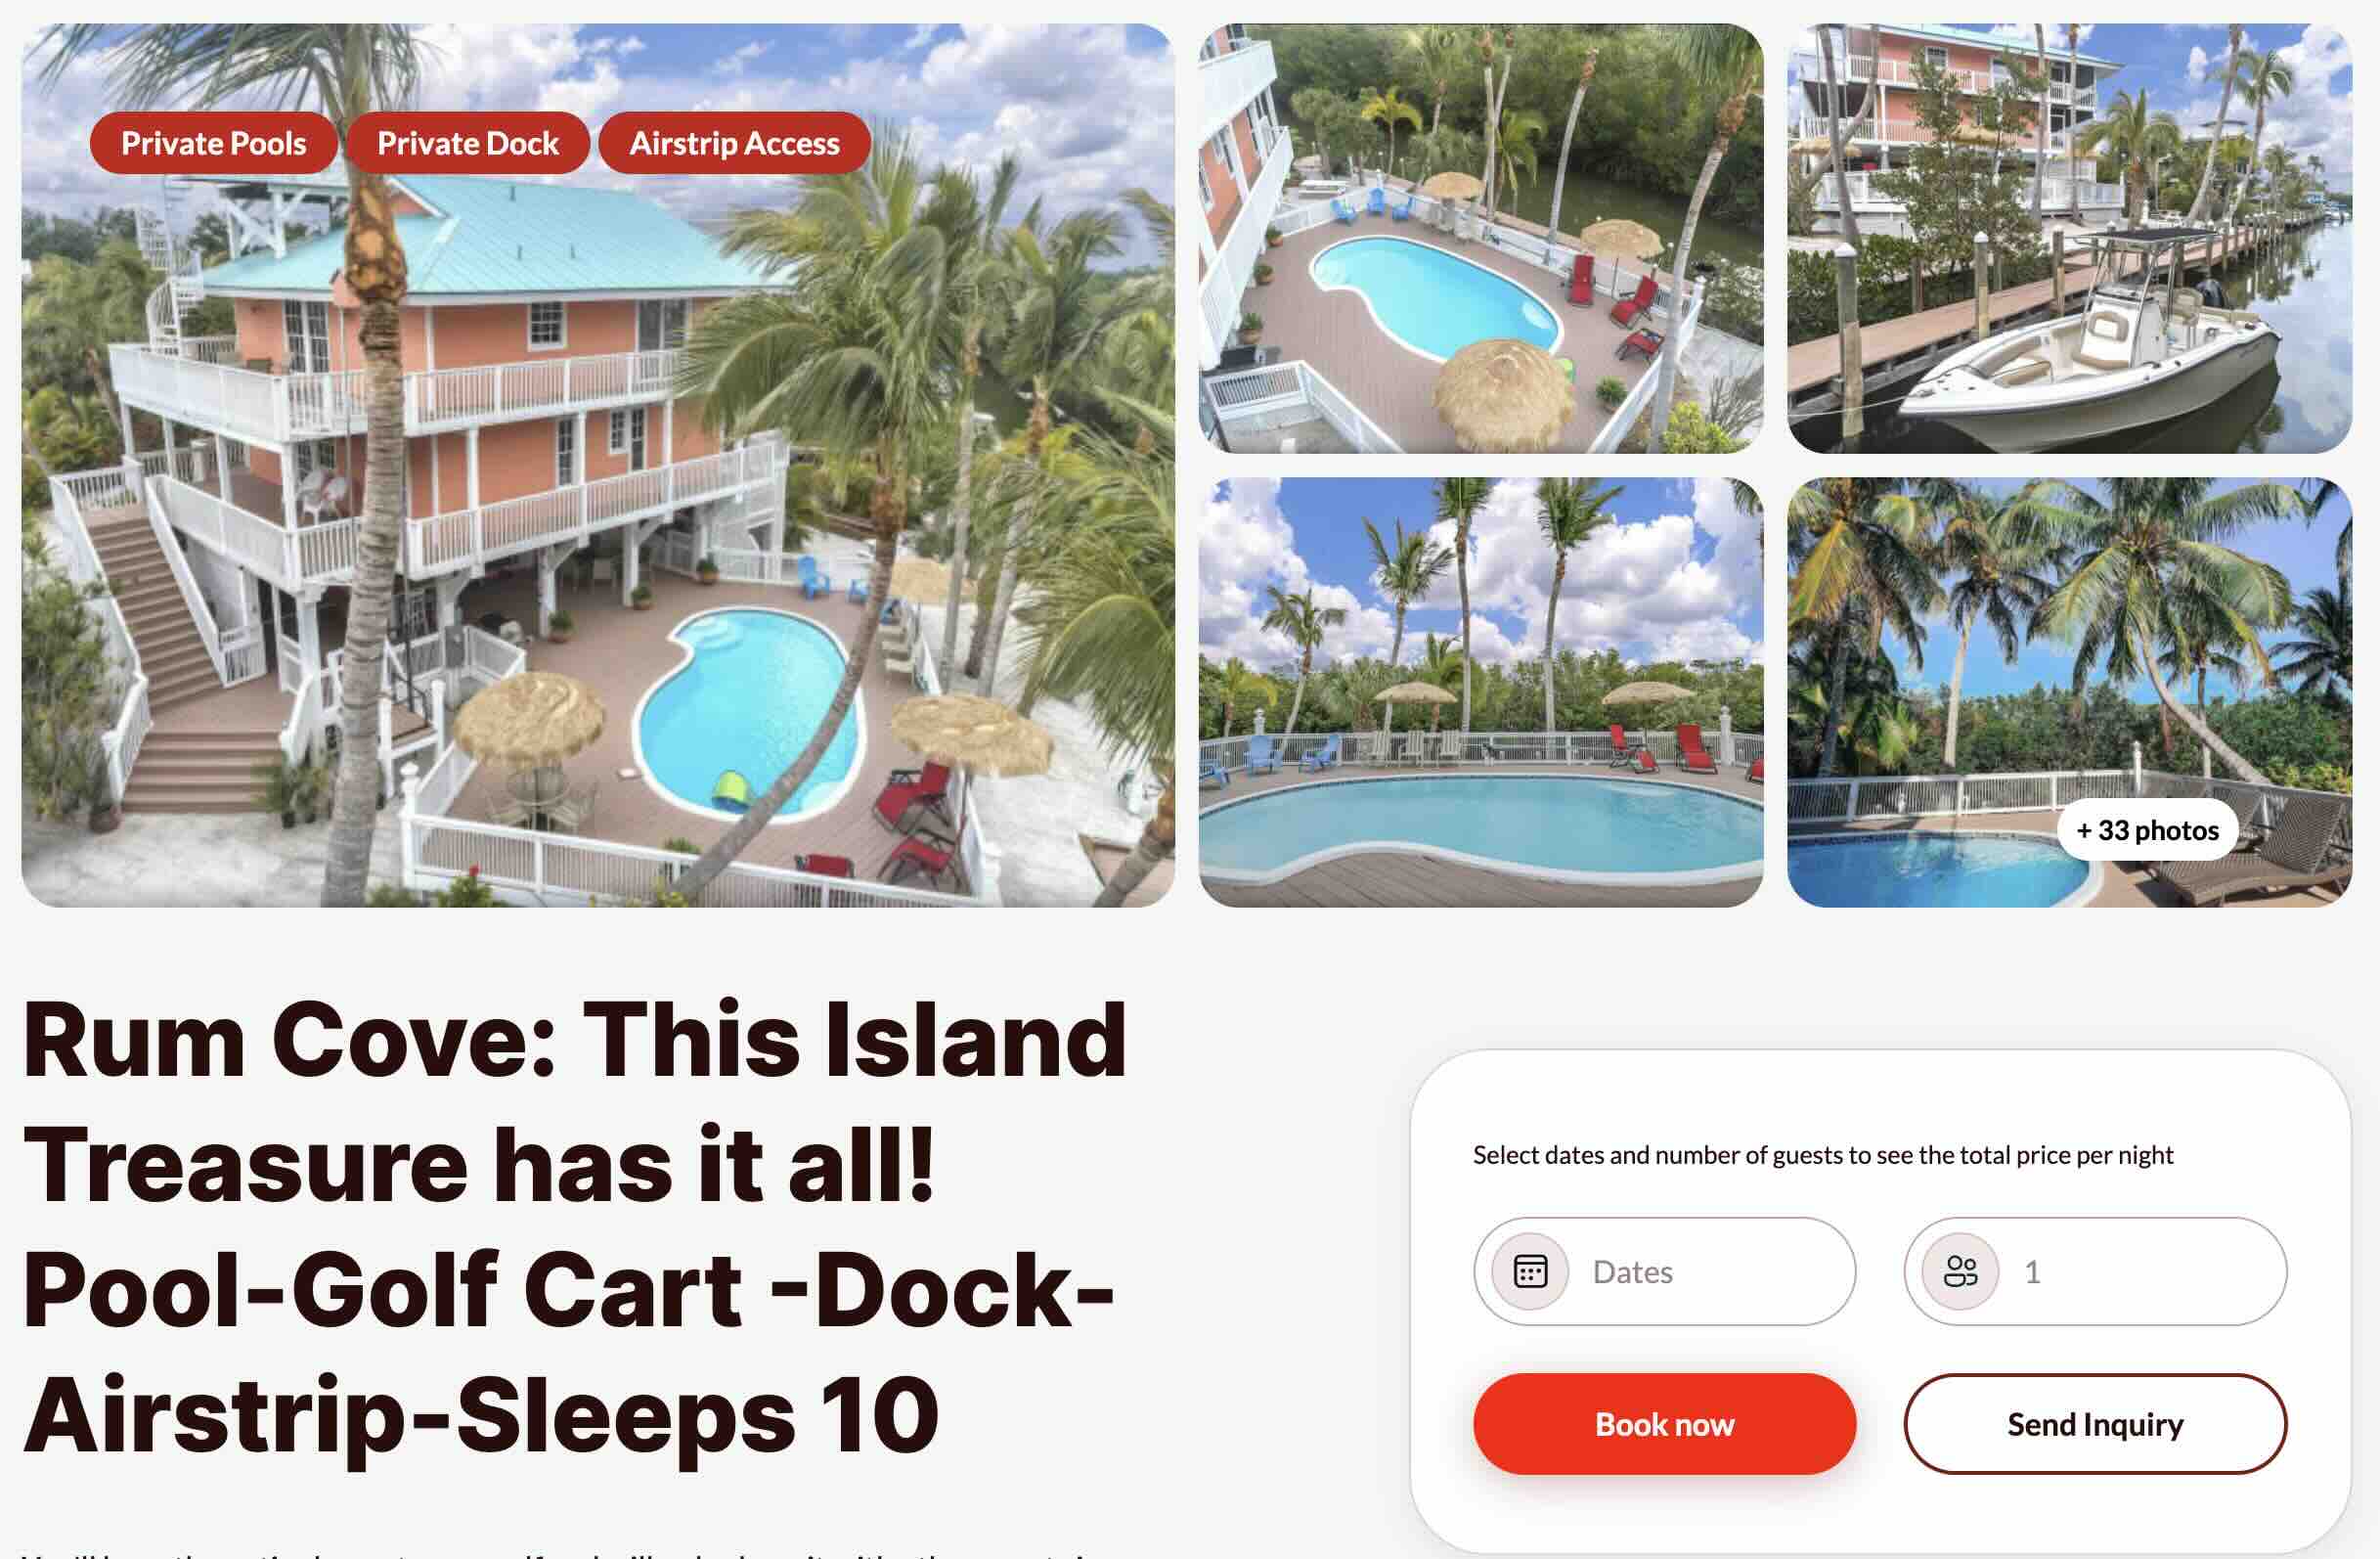 Rum cove listing on our booking site